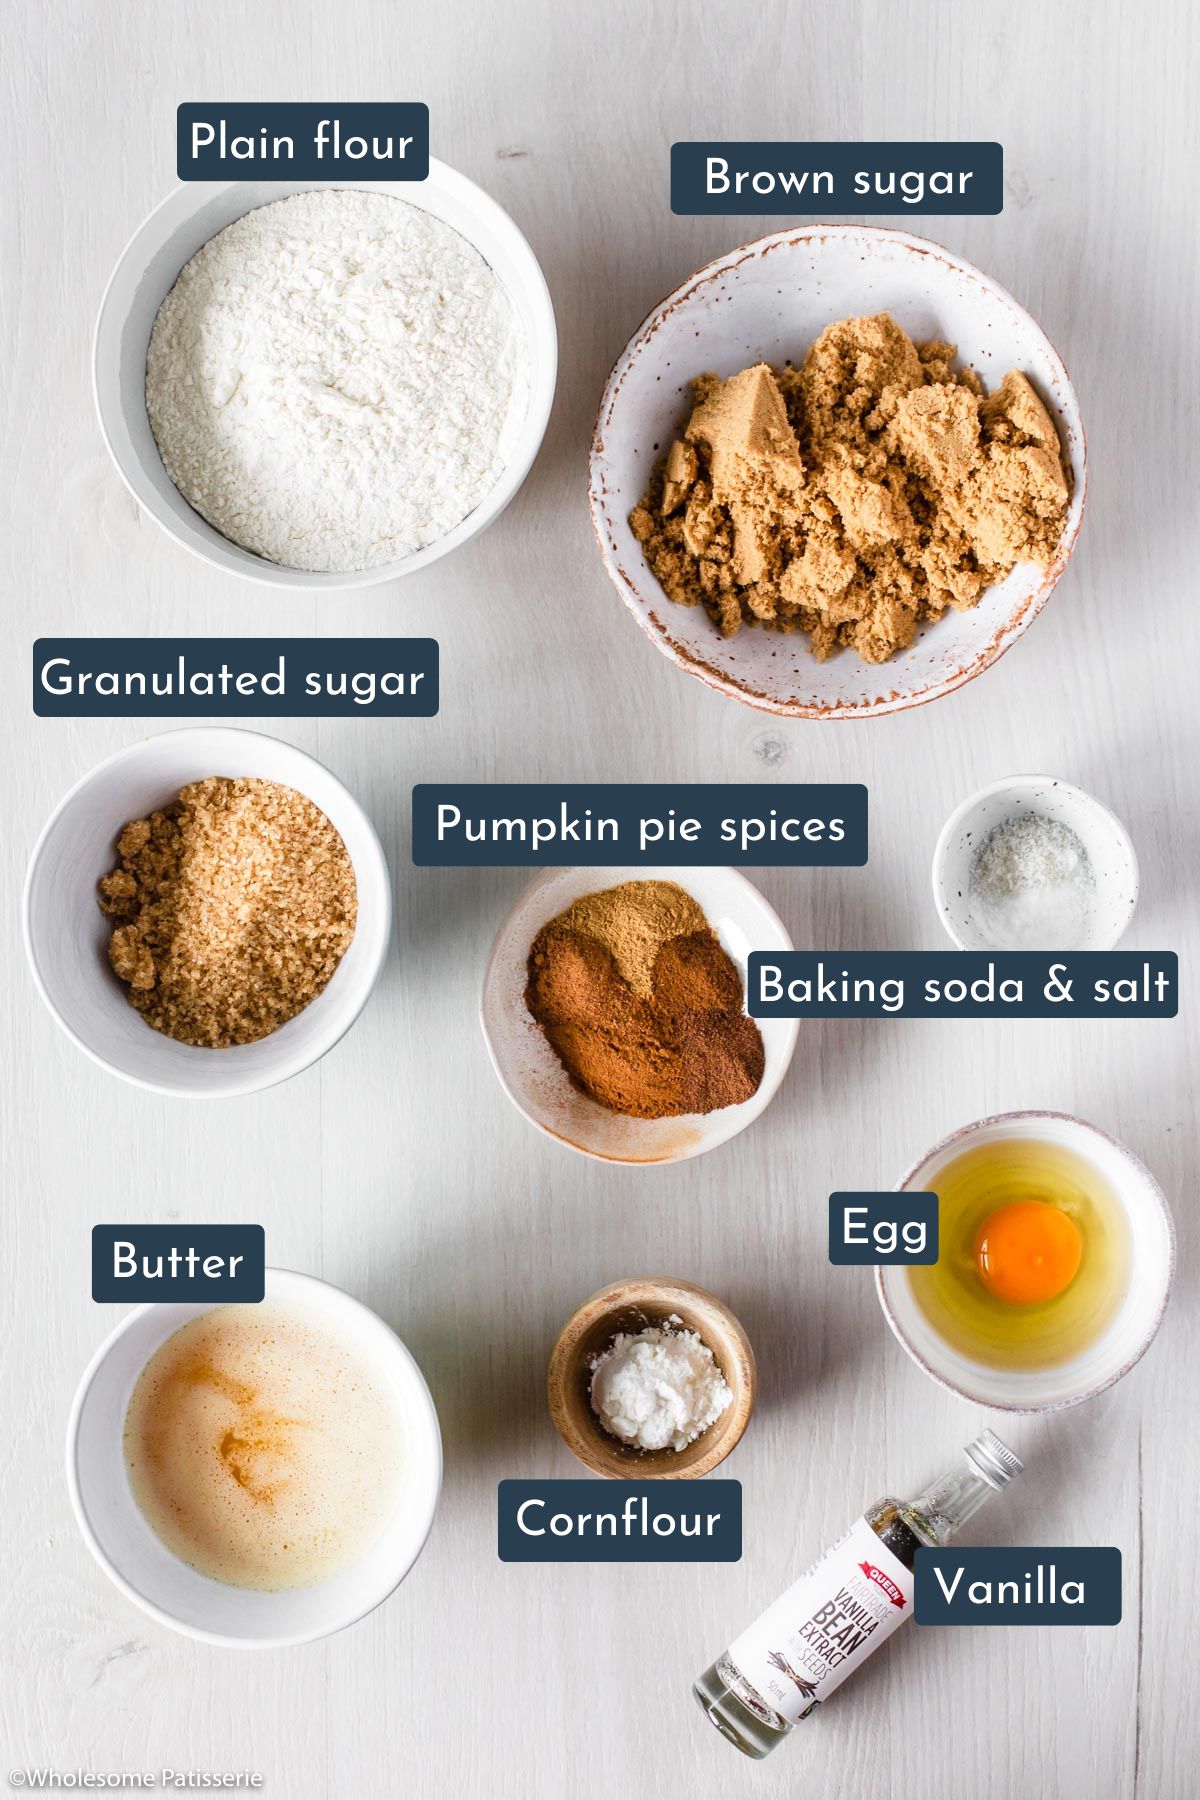 The individual ingredients laid out to show what you need to make this recipe.